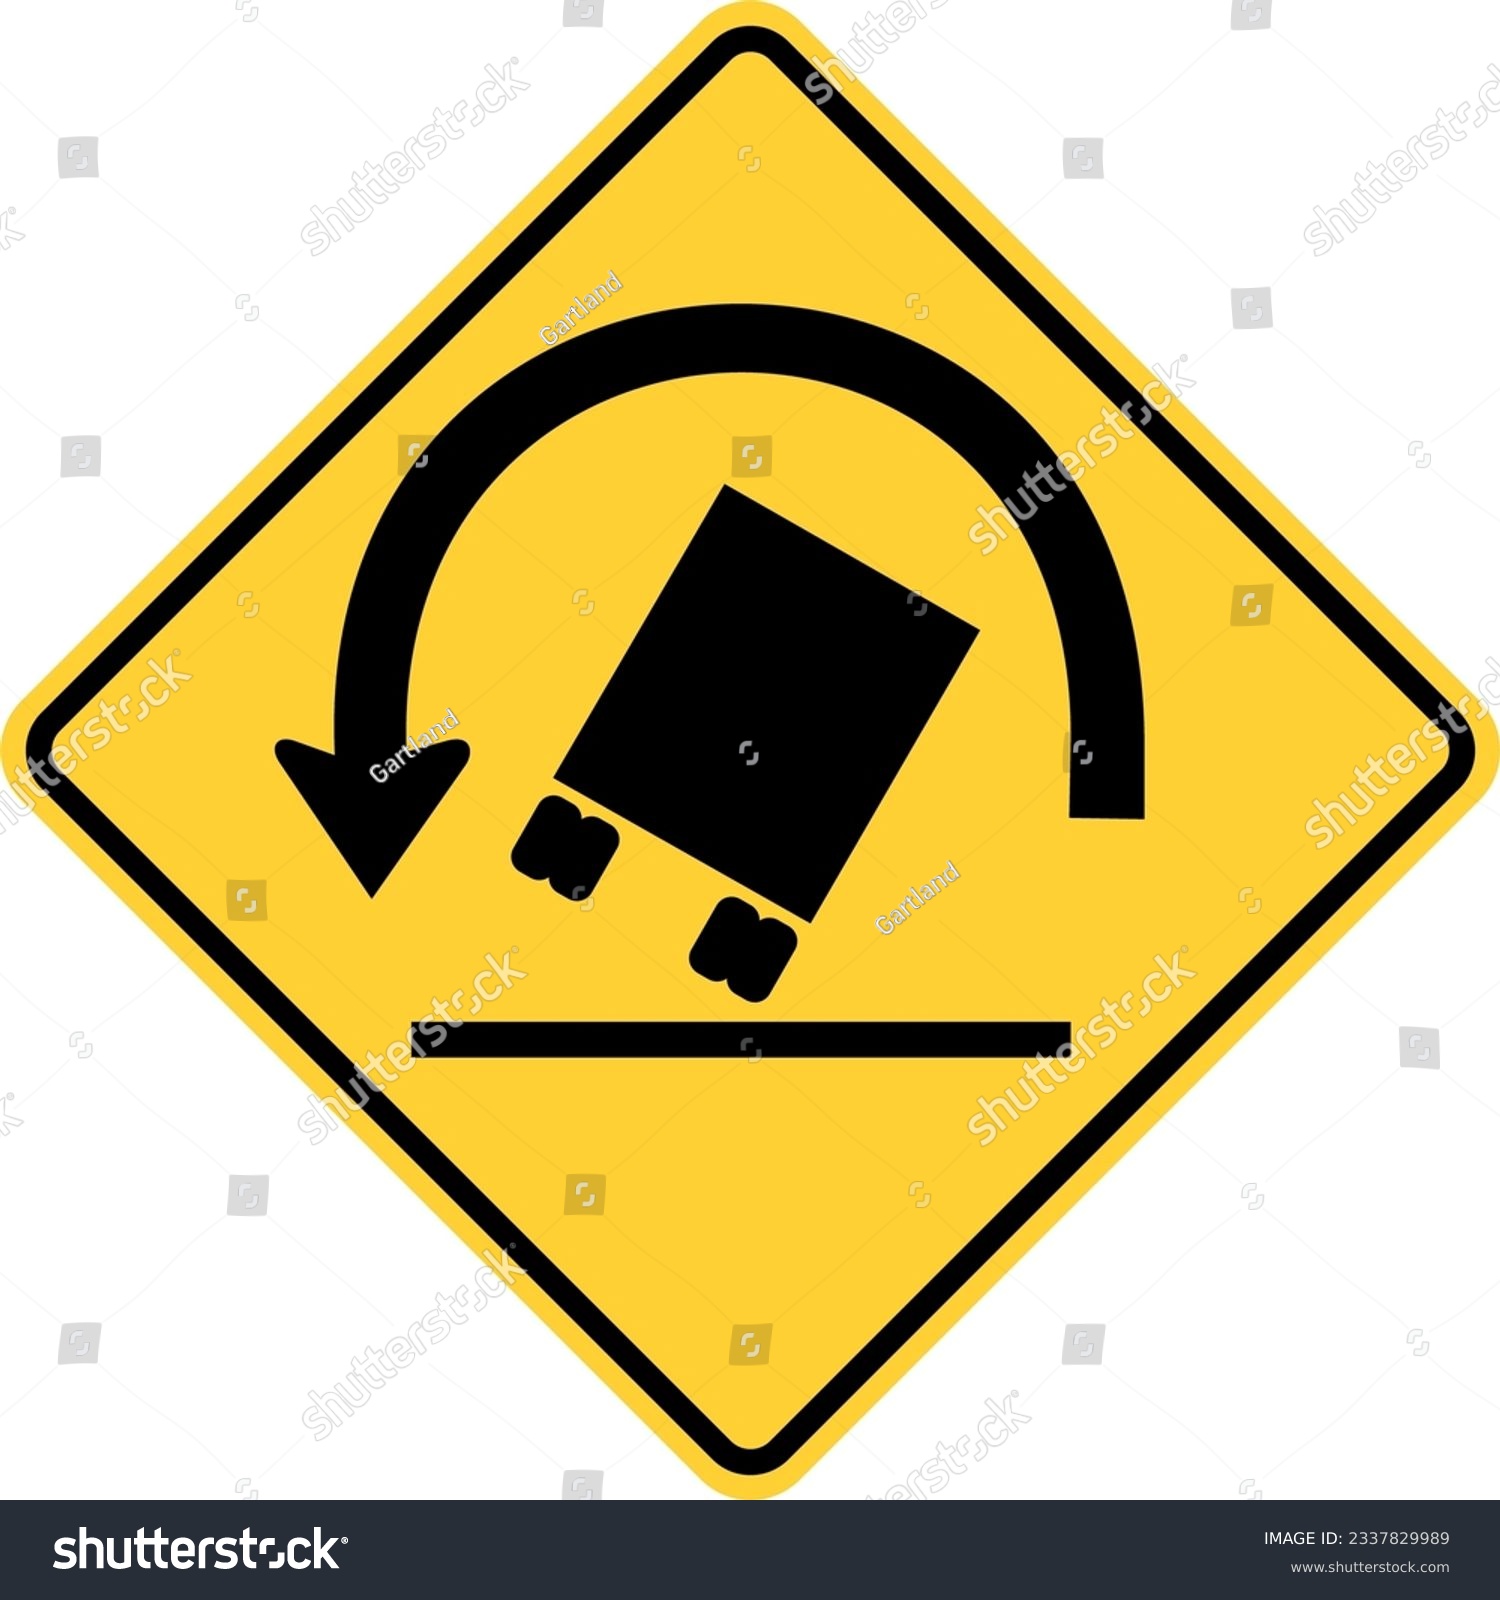 SVG of Vector graphic of a usa truck rollover warning highway sign. It consists of a black truck tilted at a dangerous angle below a curved black arrow within a black and yellow square tilted to 45 degrees svg